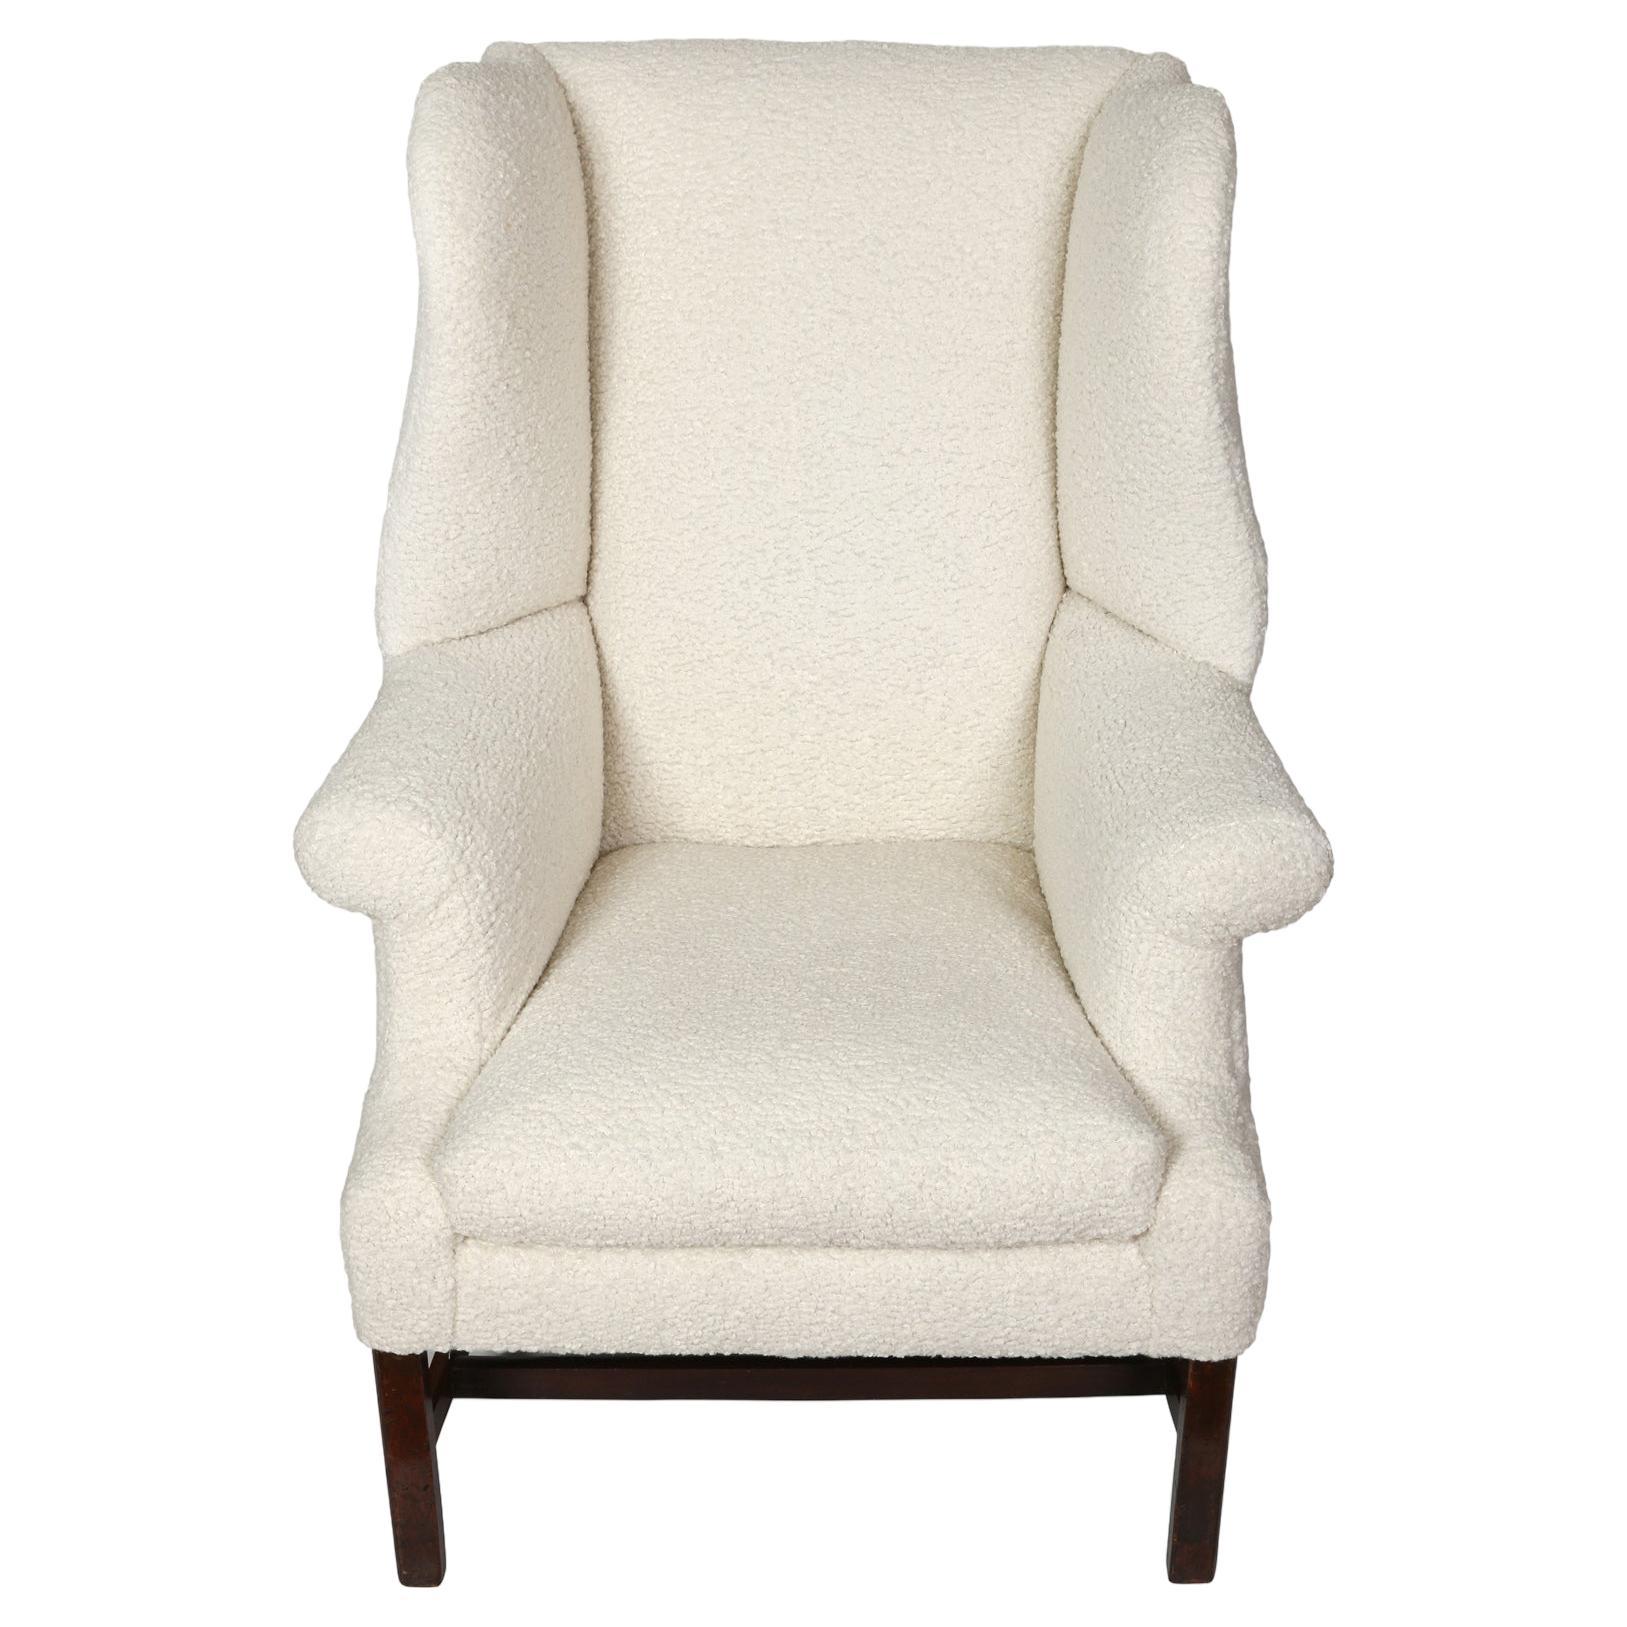 This handsome wing chair invites you to curl up w with a good book by the fire!  Upholstered in a cozy cream colored bouclé, the generously scaled chair features wide curved 